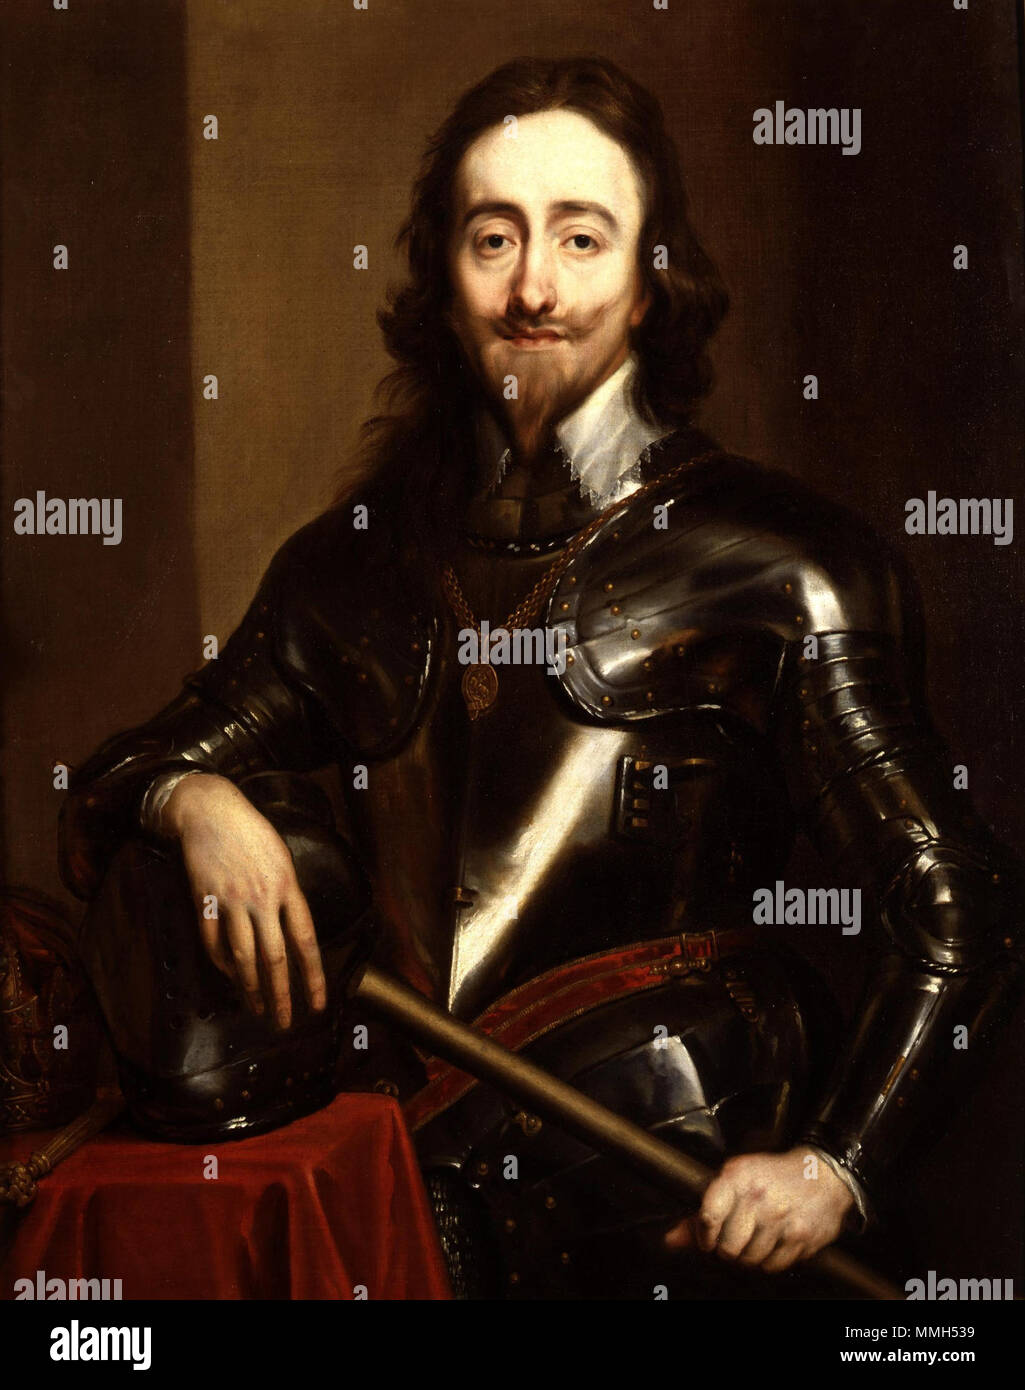 . Charles I of England  . 1630s.   Anthony van Dyck  (1599–1641)      Alternative names Anthony van Dyck, Anthonie van Dyck, Anton van Dijck, Antonis van Deik, Antoon van Dijk, Anthonis van Dyck, Antoine van Dyck  Description Flemish painter, draughtsman and printmaker  Date of birth/death 22 March 1599 9 December 1641  Location of birth/death Antwerp Blackfriars, London  Work location Antwerp (1609–1610, 1615–1620), London (1620-March 1621), Zaventem (1621), Genoa (October 1621-February 1622), Rome (February 1622-July 1622), Florence (1622), Bologna (1622), Venice (1622), Rome (1623), Mantua  Stock Photo